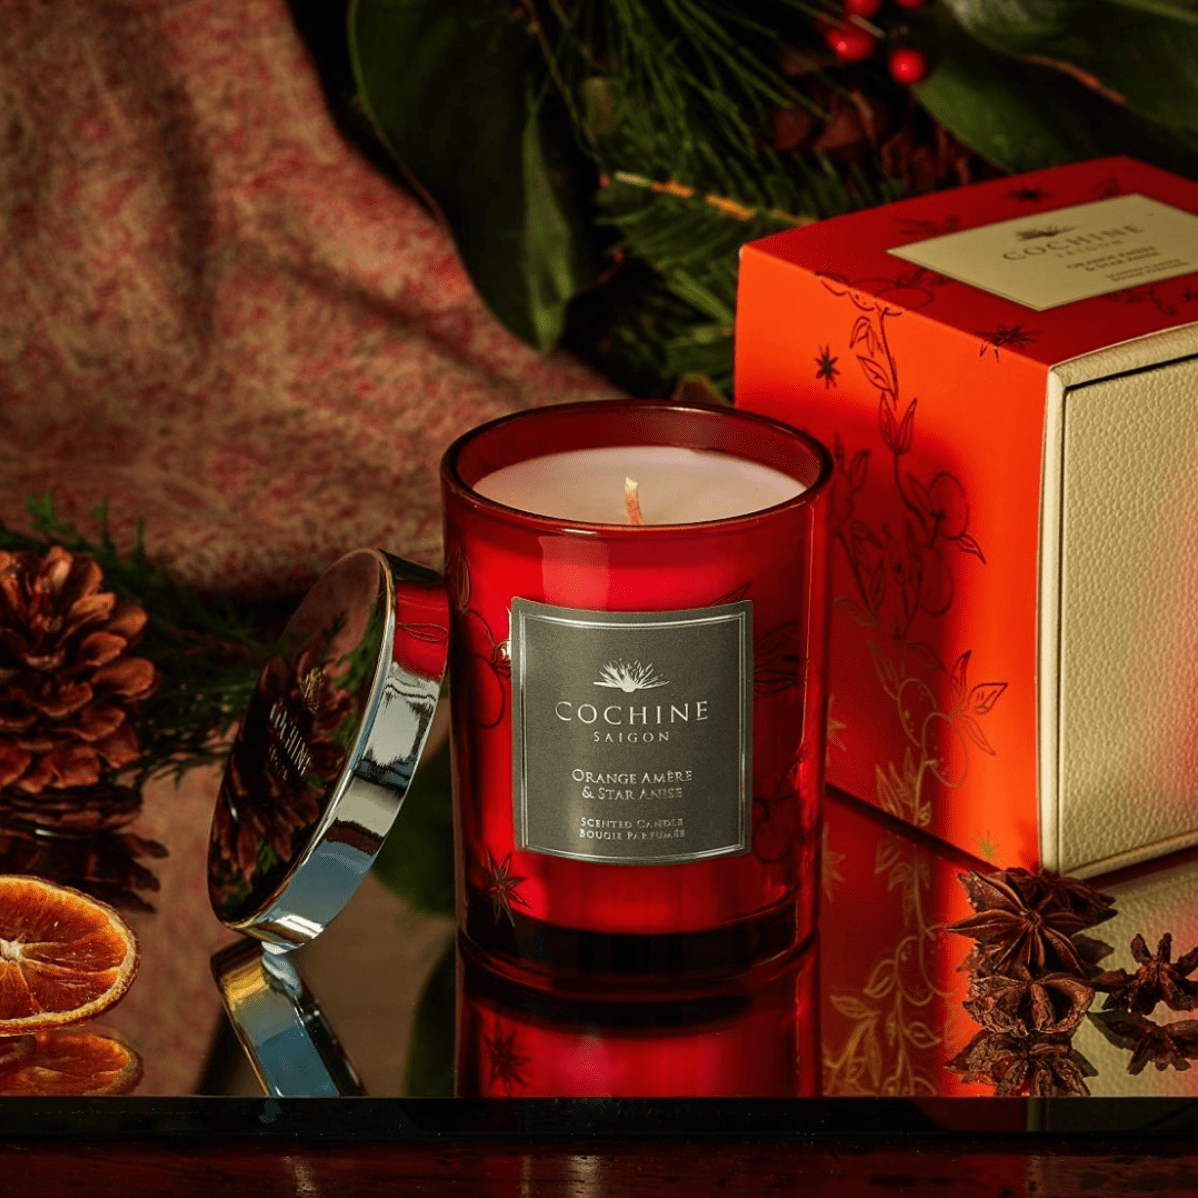 Cochine Home Fragrances of Cochines luxury scented candles and Cochine reed diffuers in Cochine Orange Amere & Star Anise Candle